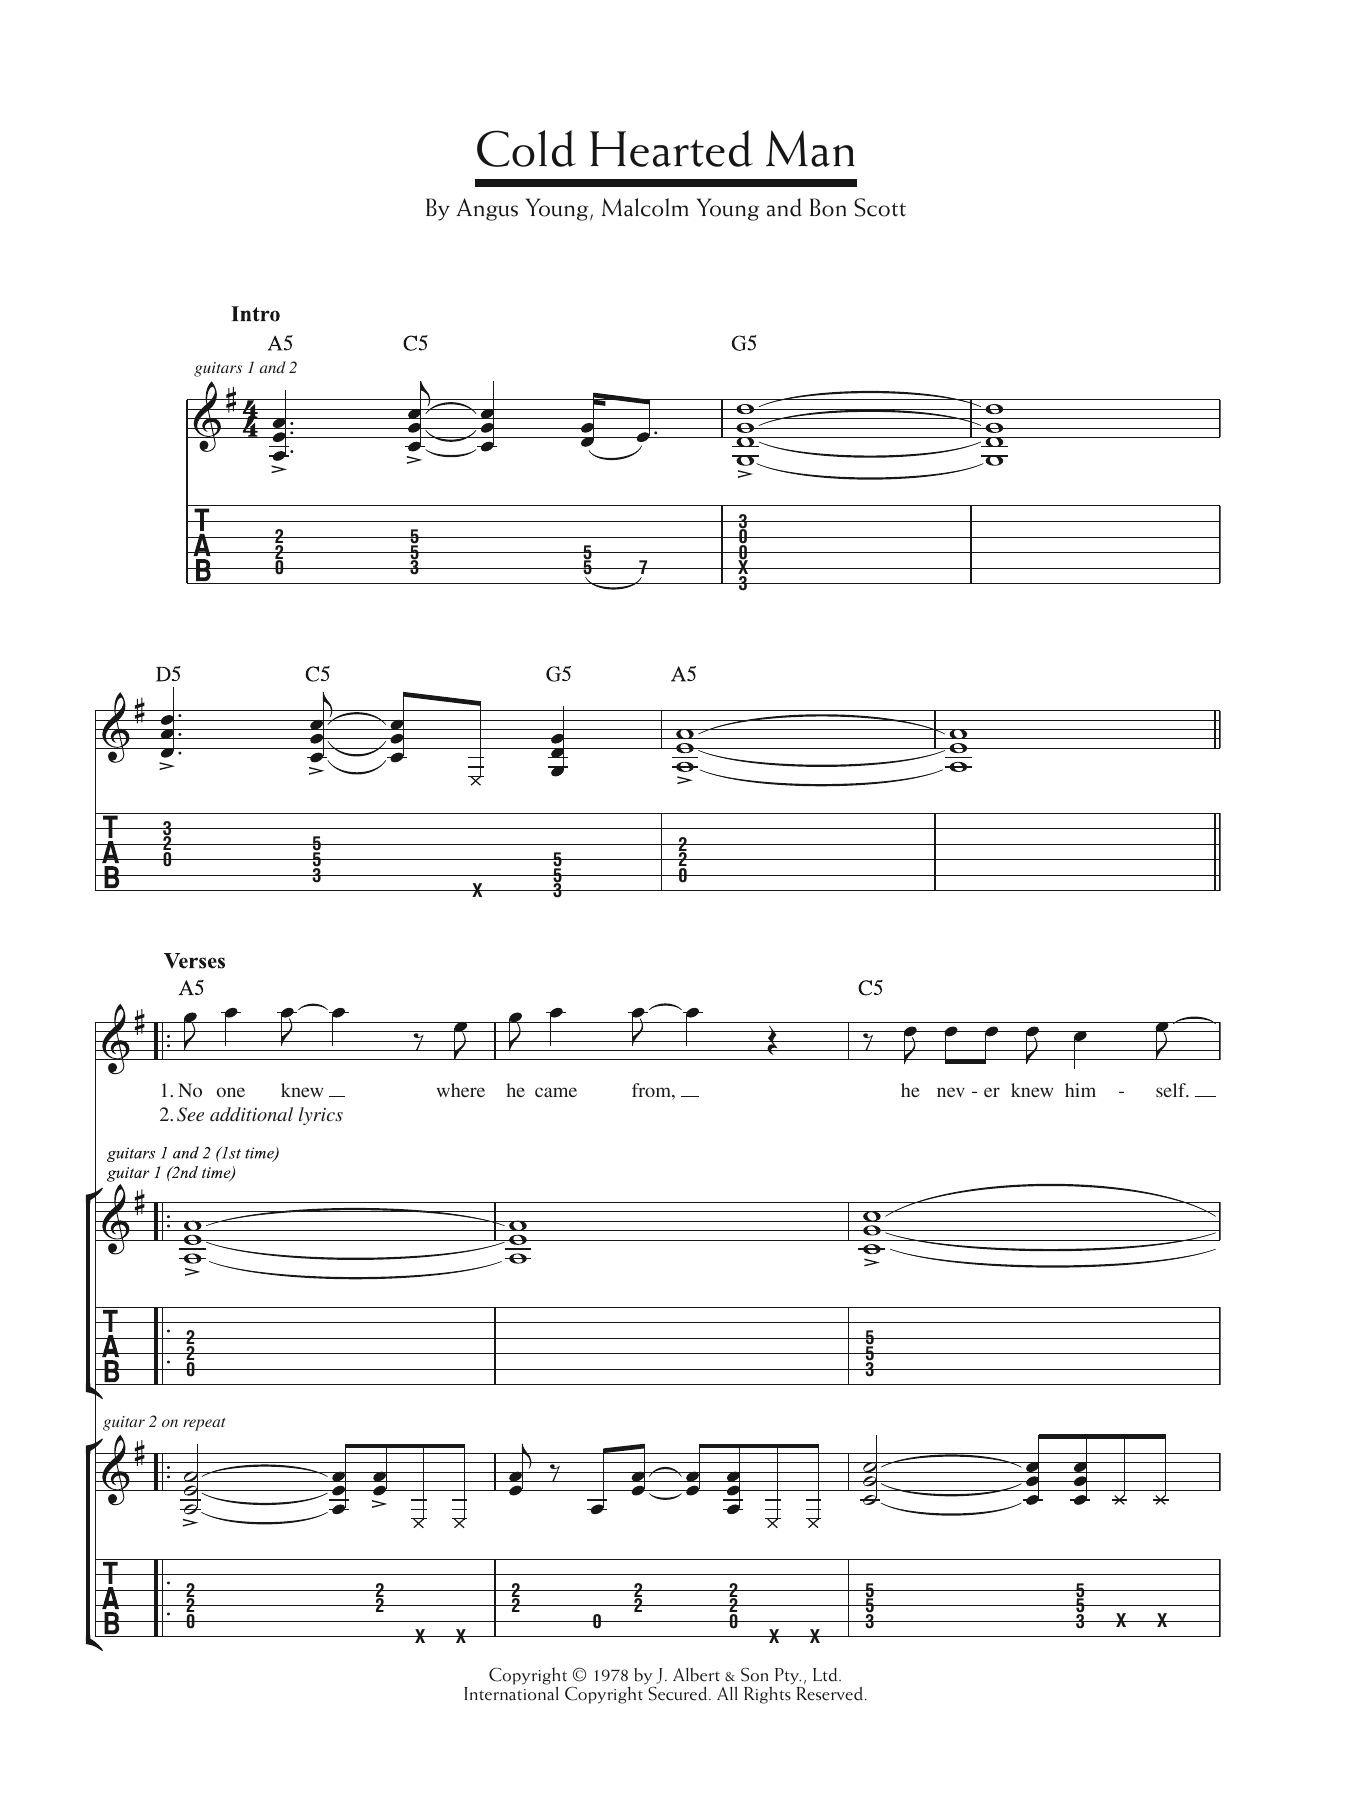 Download AC/DC Cold Hearted Man Sheet Music